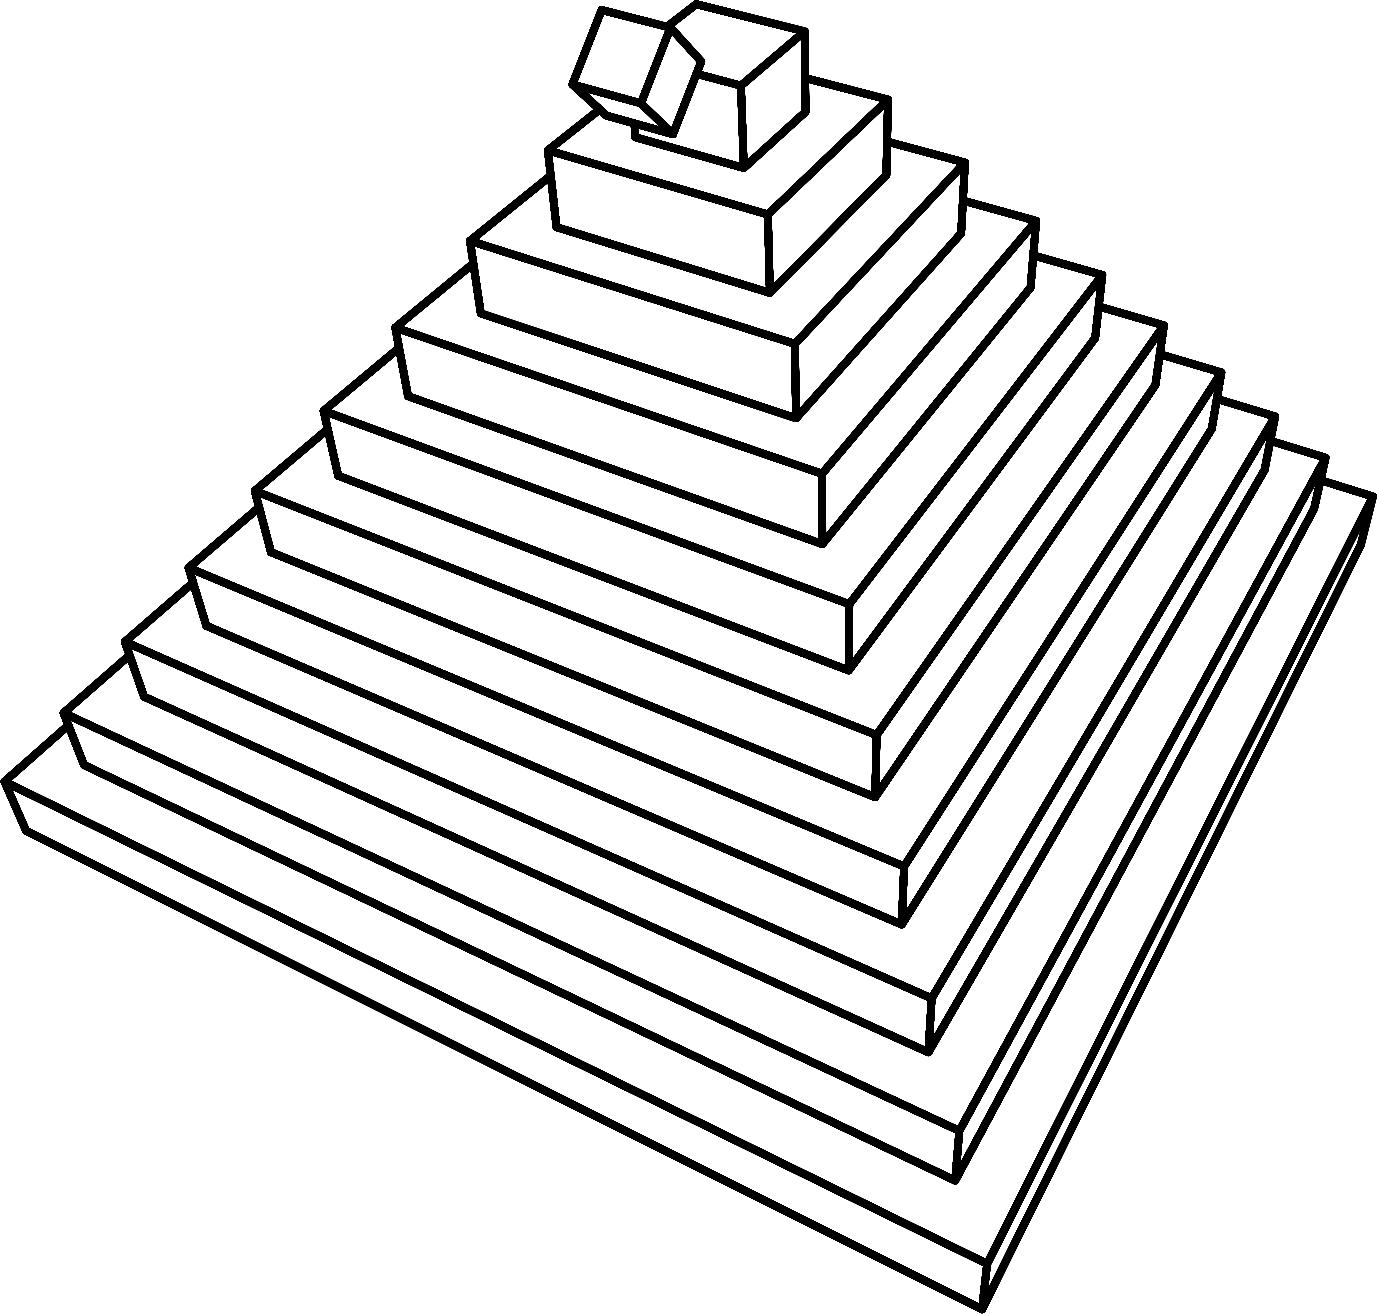 3D Cube Rolling Down a pyramid [Animation] png